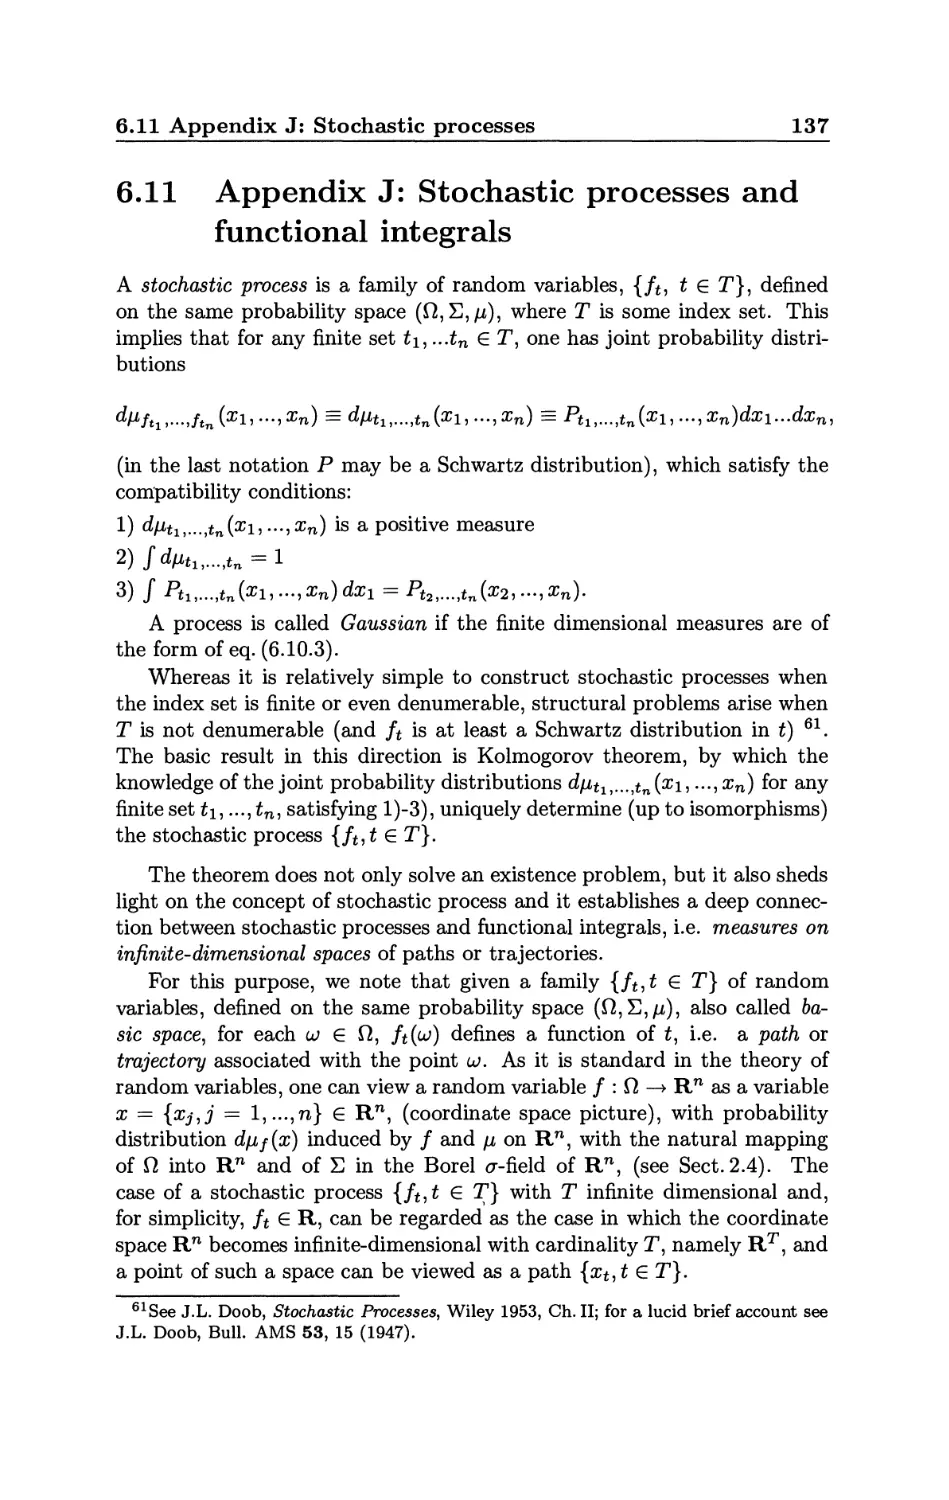 6.11 Appendix J: Stochastic processes and functional integrals